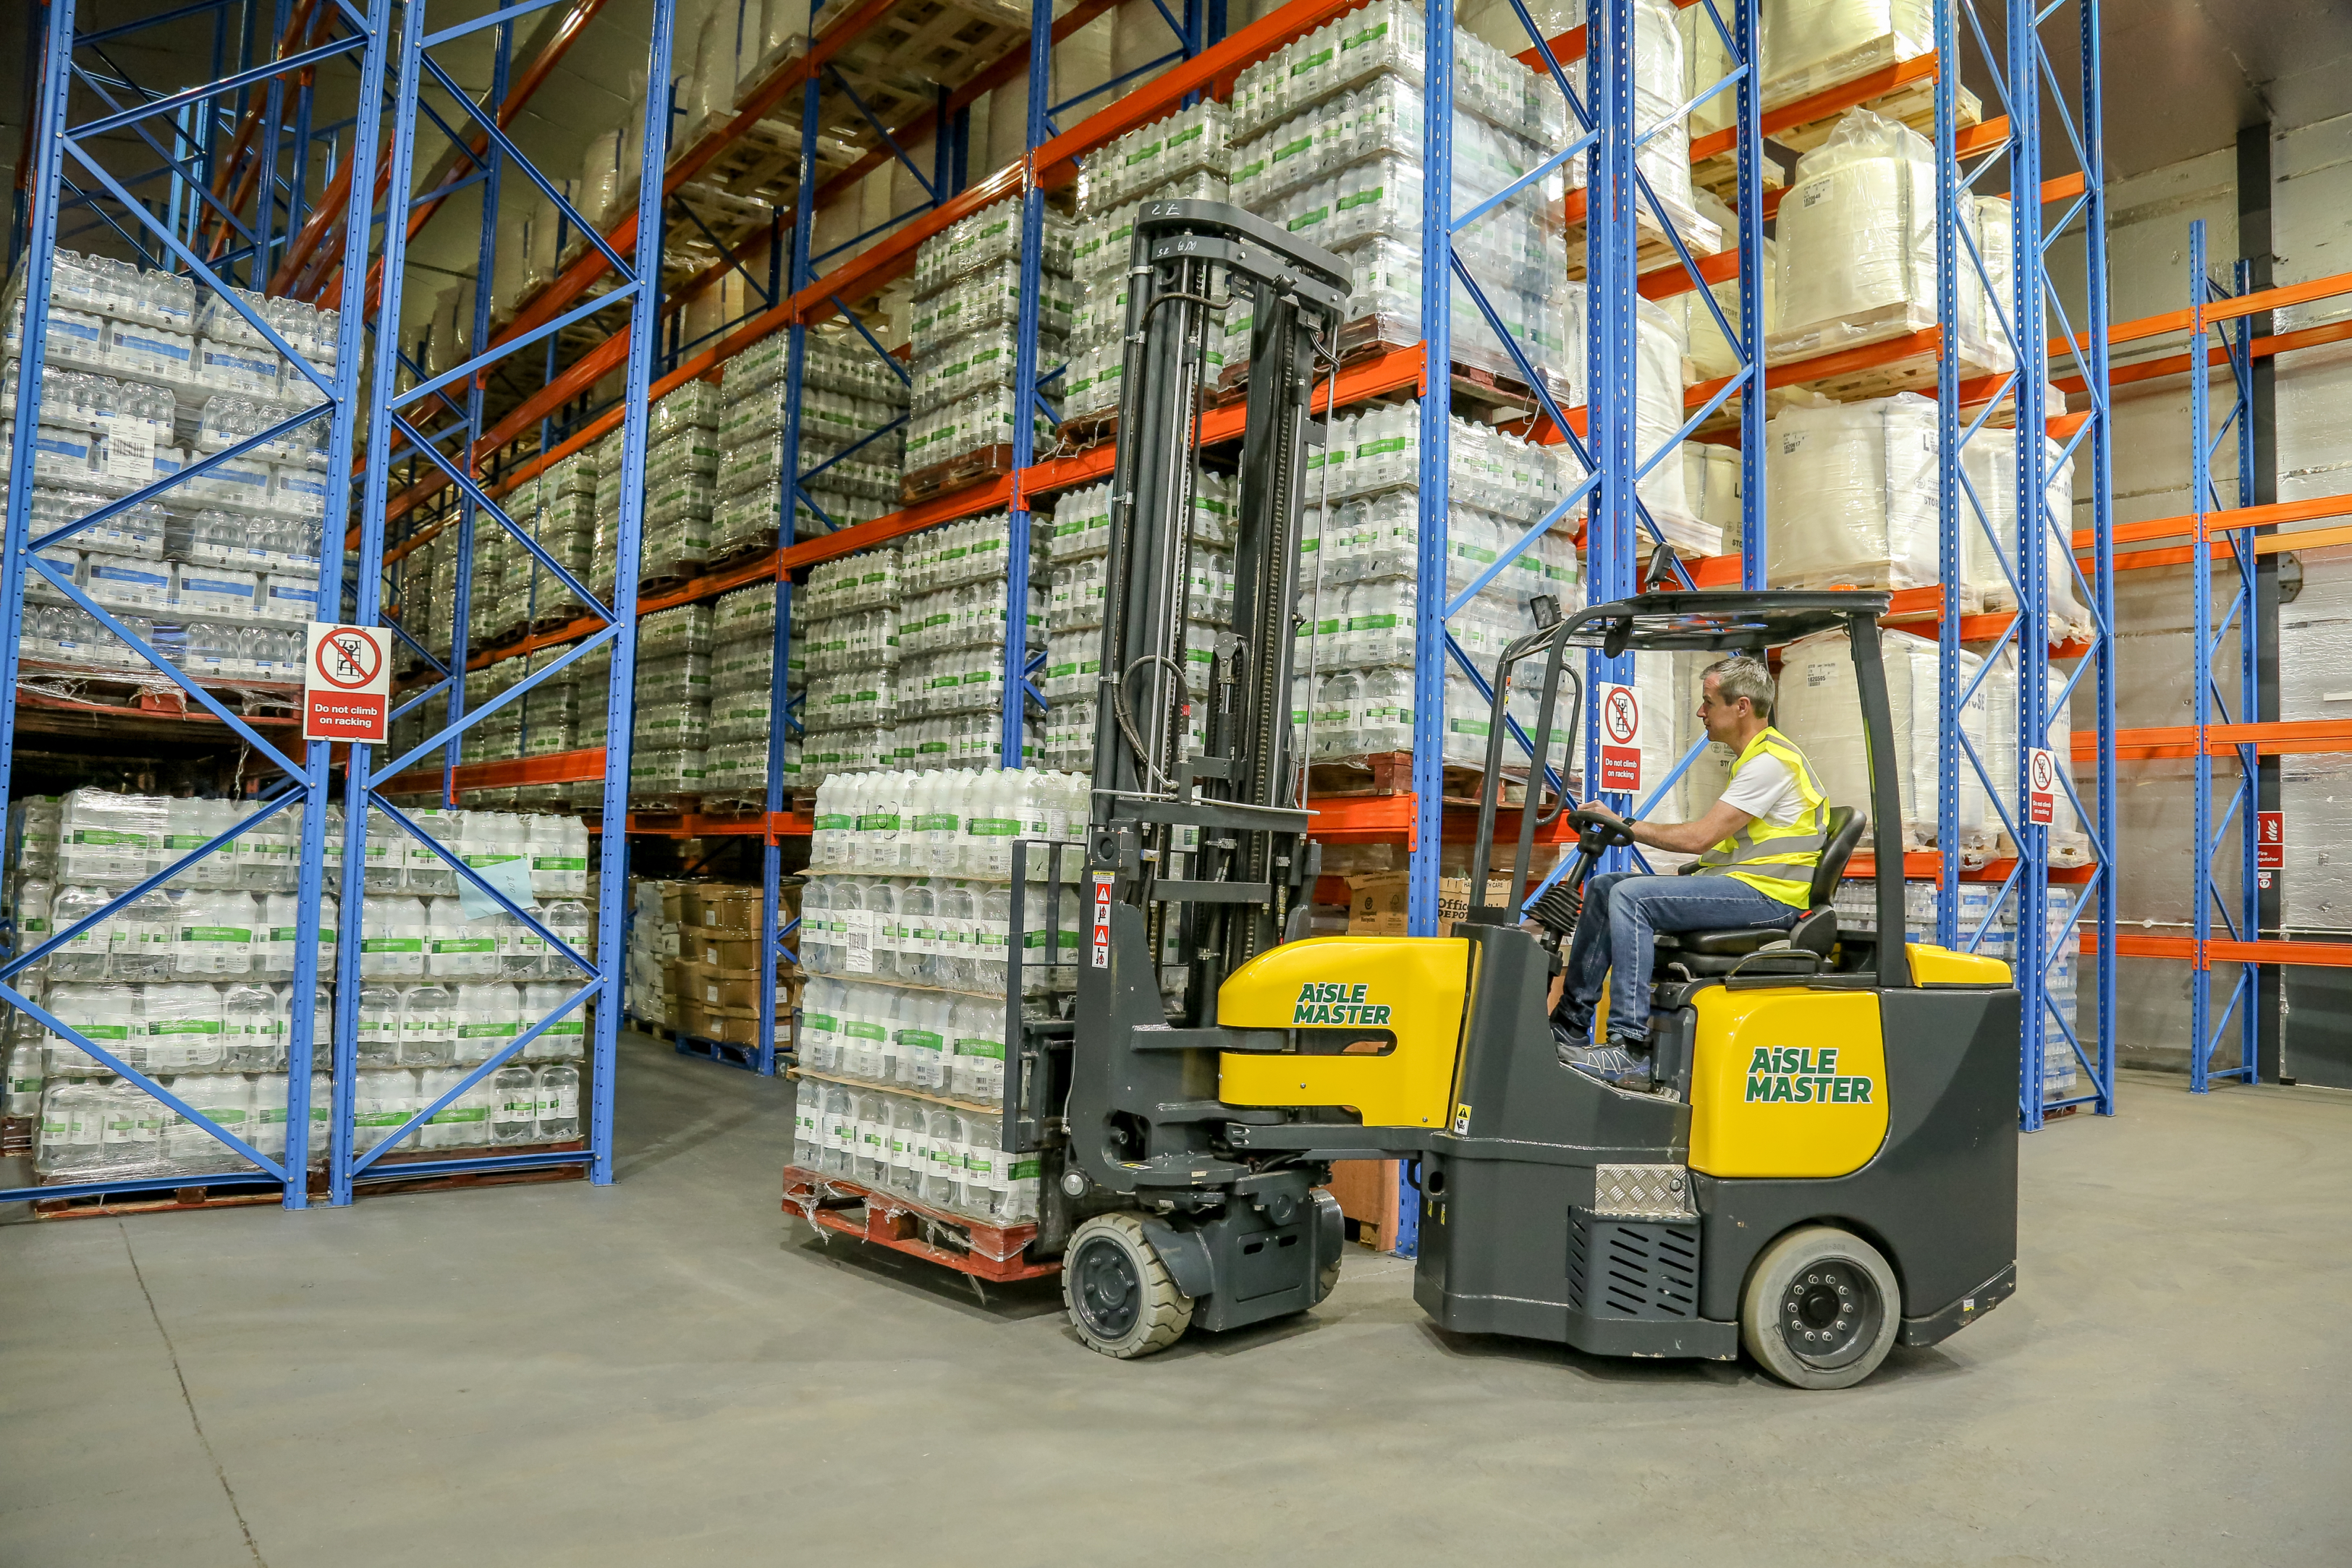 The Combilift-Aisle Master, an Articulated Narrow Aisle solution that shows why Combilift is an ideal choice.